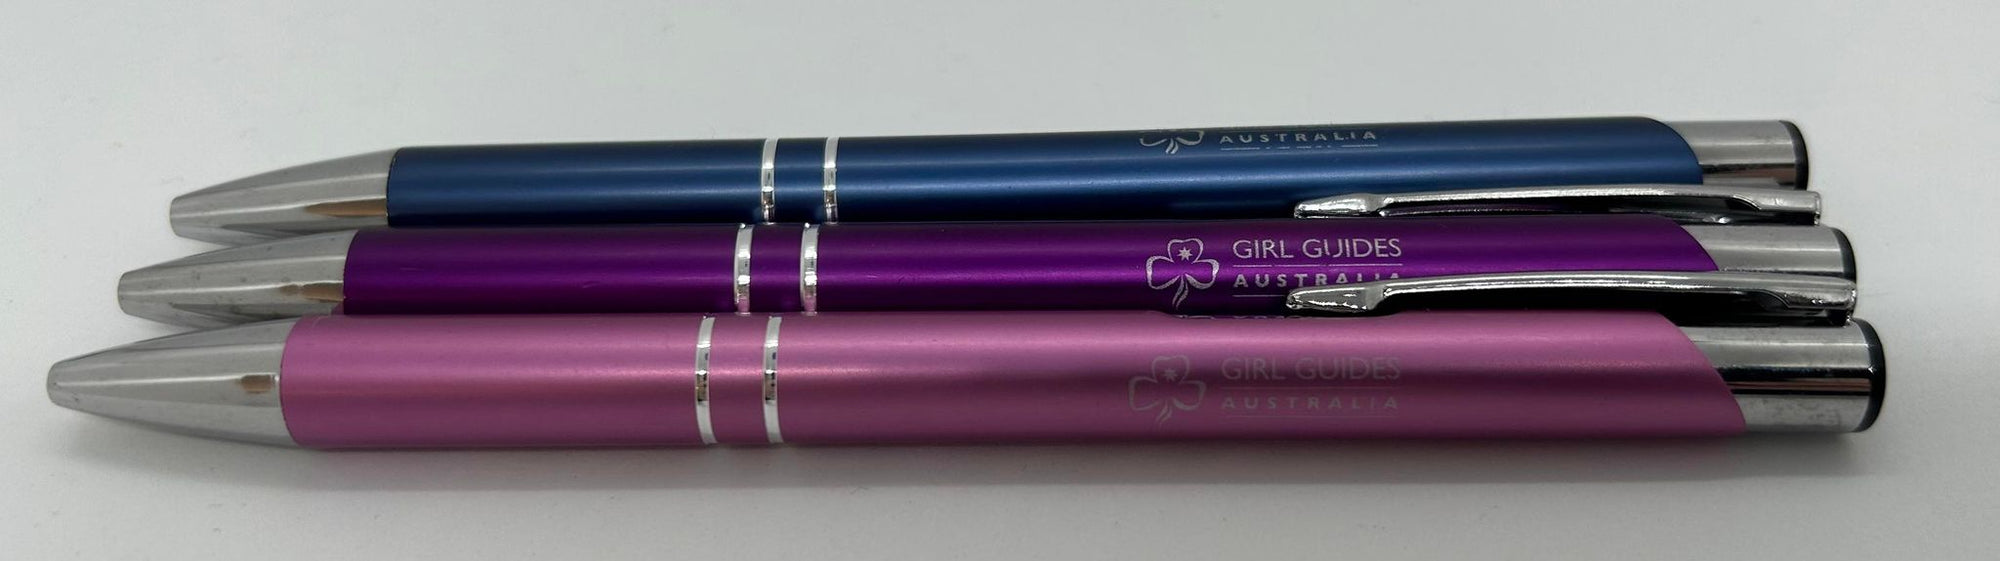 a metal pen available in the outer colour casing colours of blue, pink or purple